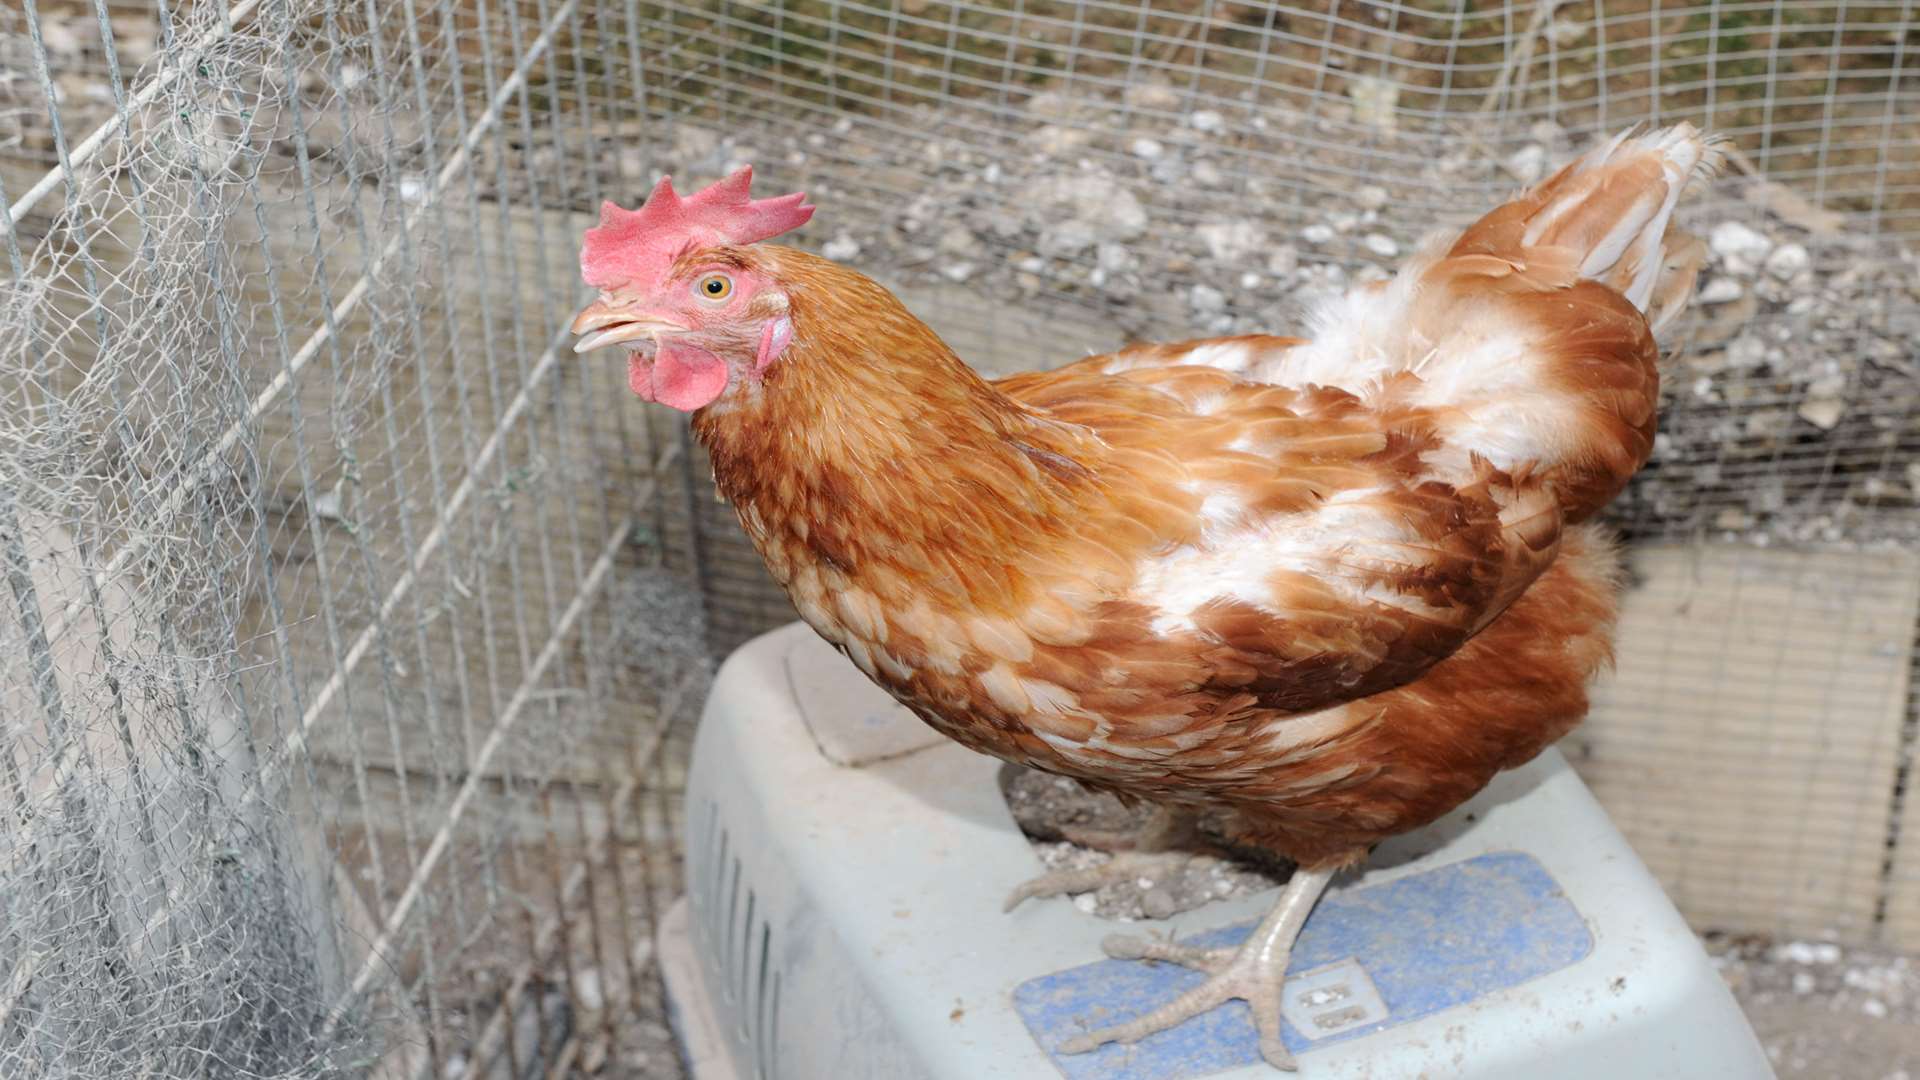 A Fresh Start for Hens is hoping to save hundreds of hens, similar to this one, from being slaughtered